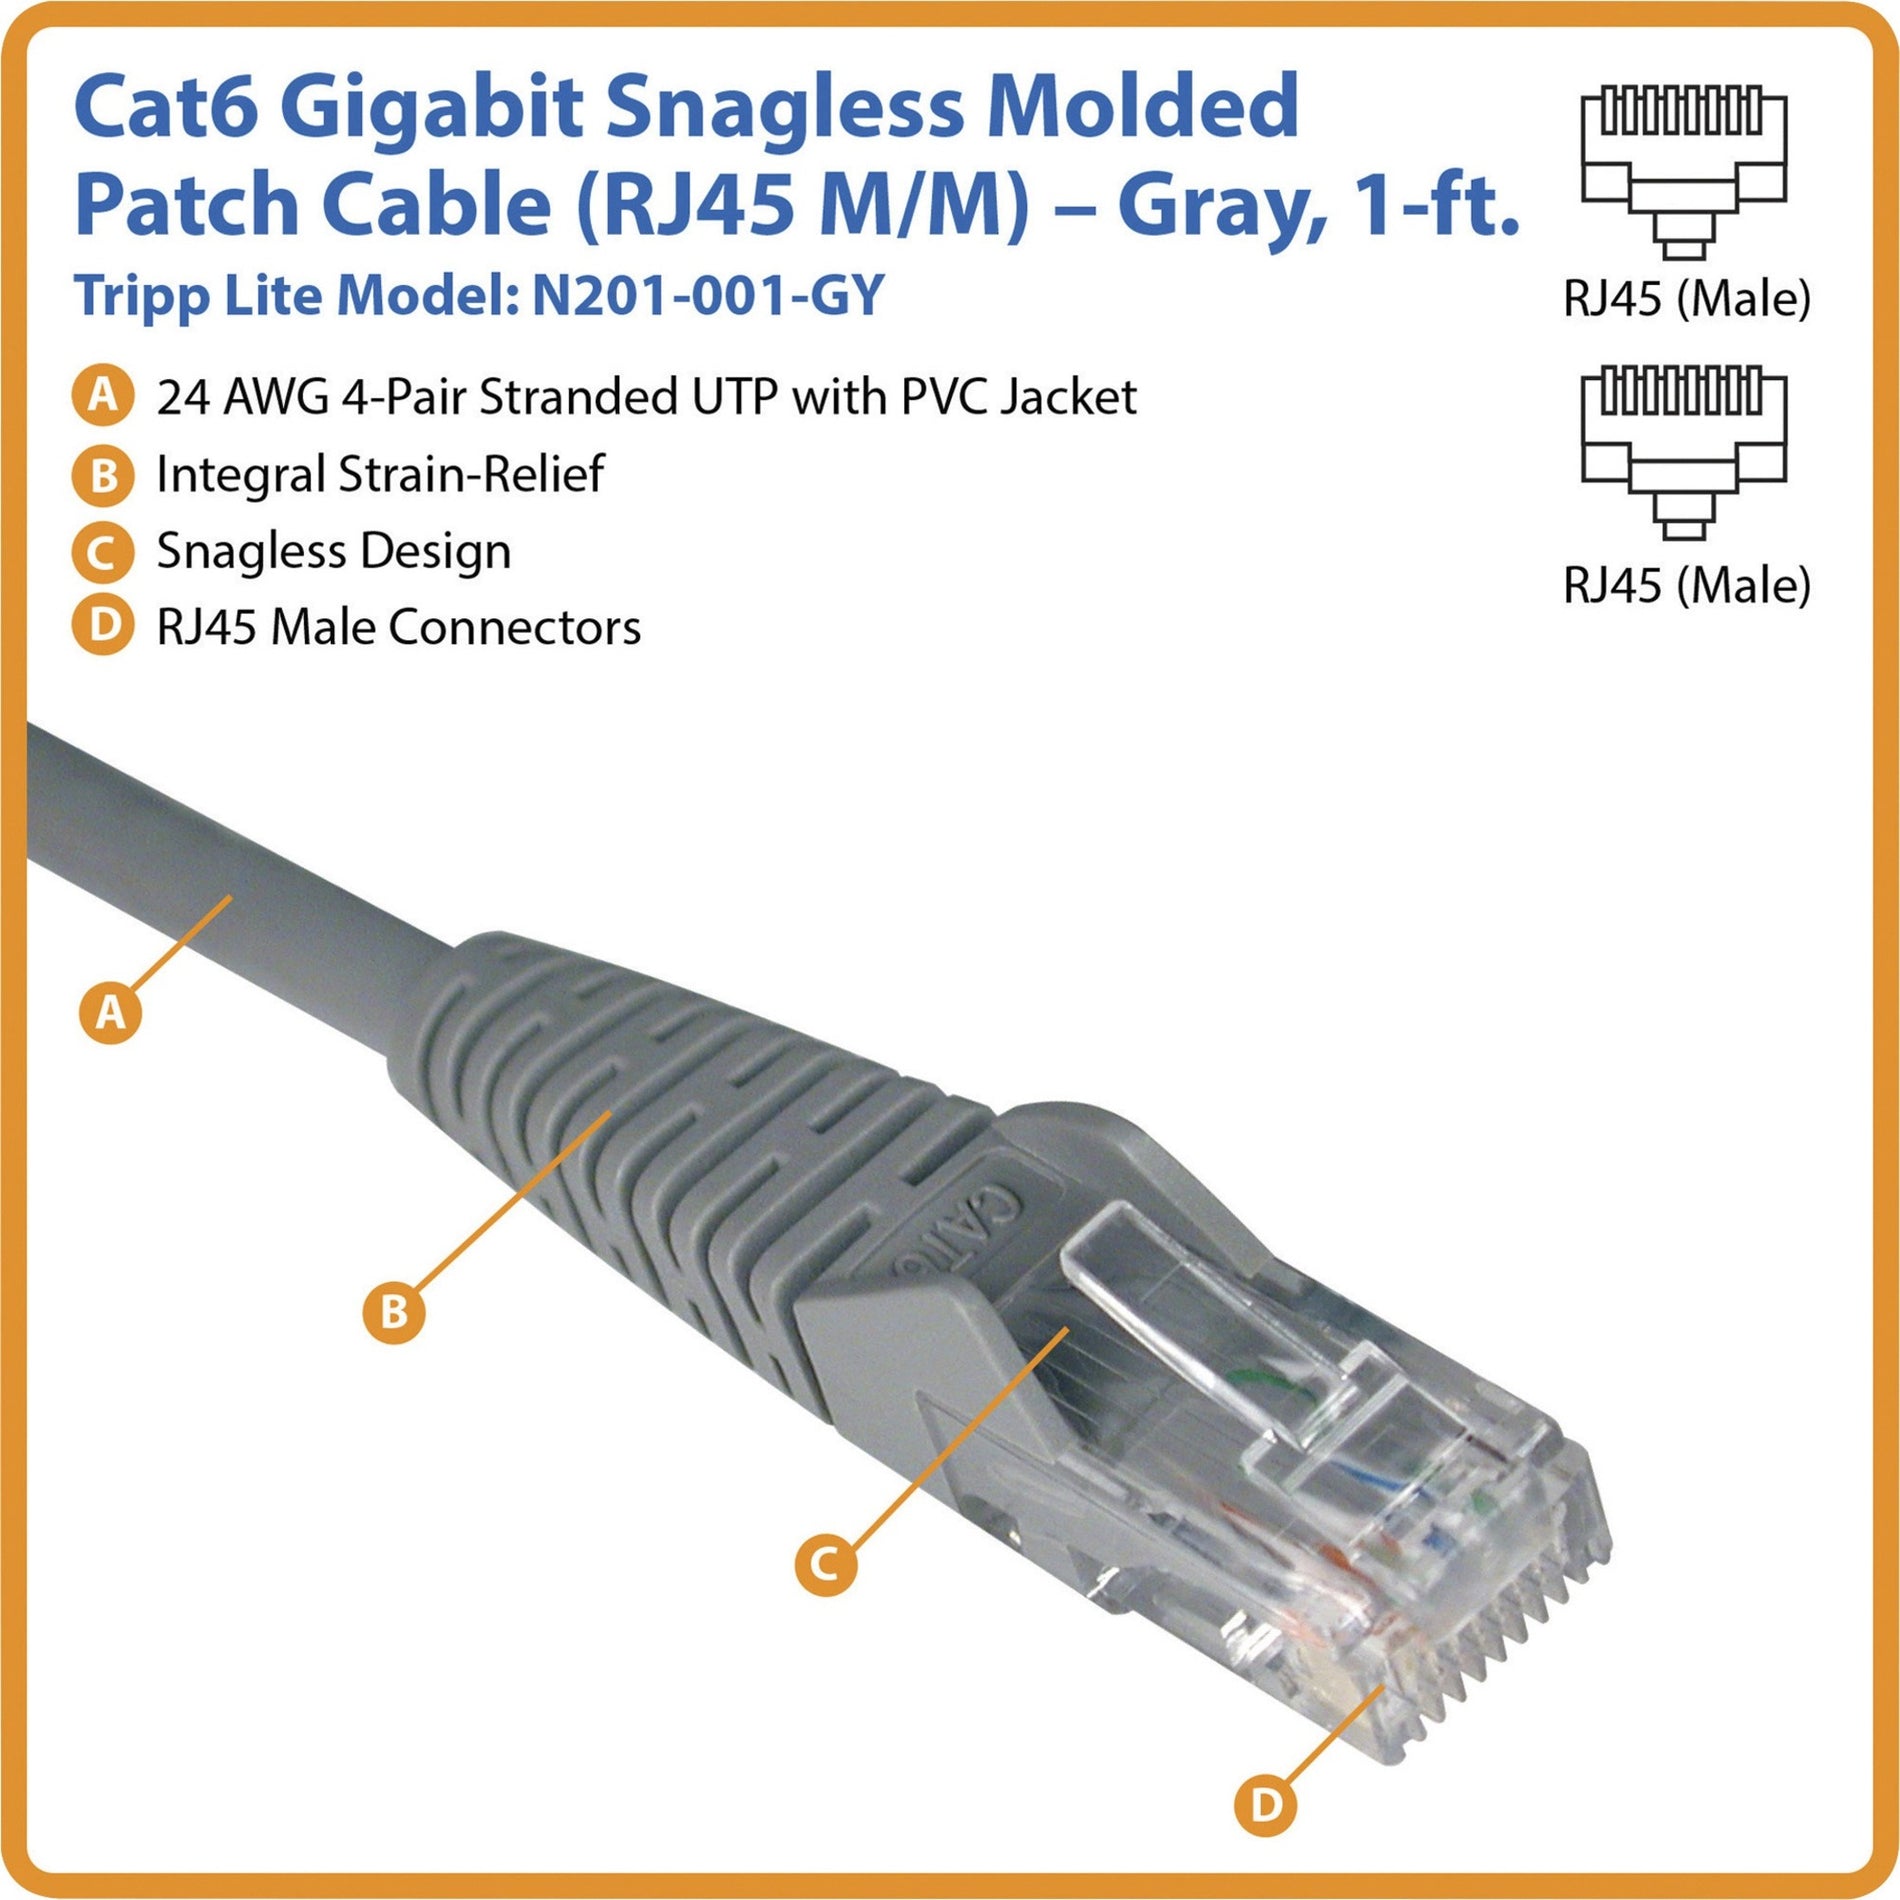 Tripp Lite N201-001-GY Cat6 UTP Patch Cable, 1ft Gray Gigabit Snagless RJ45 Patch Cable